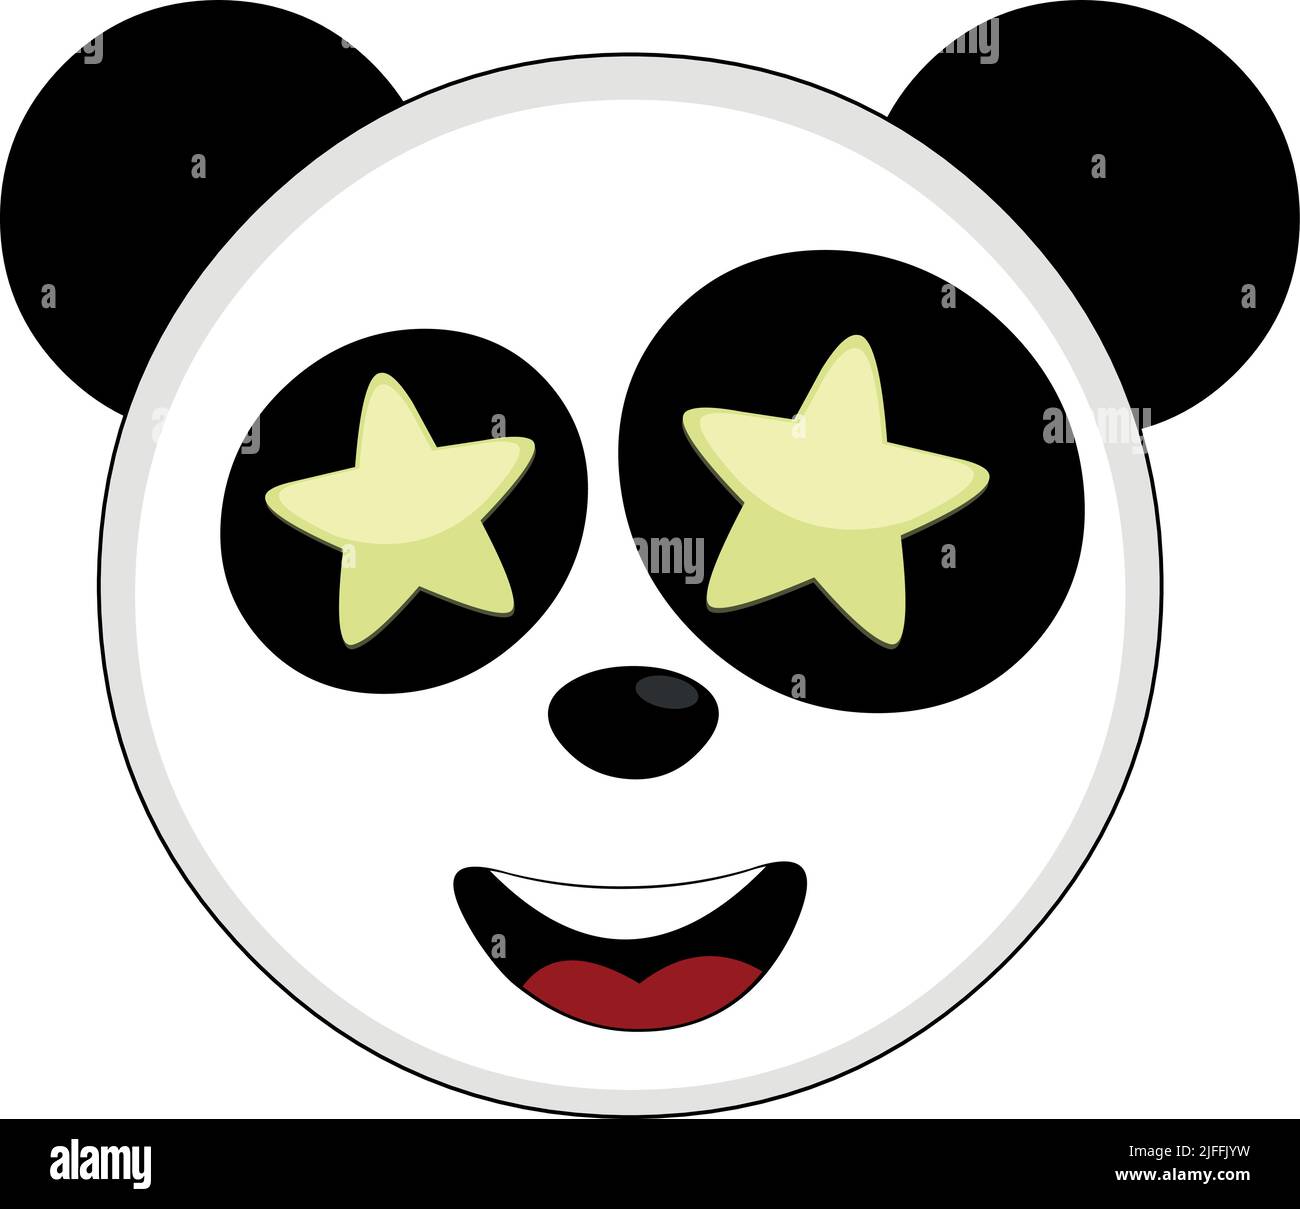 Vector illustration of the face of a cartoon panda bear with stars in its eyes Stock Vector